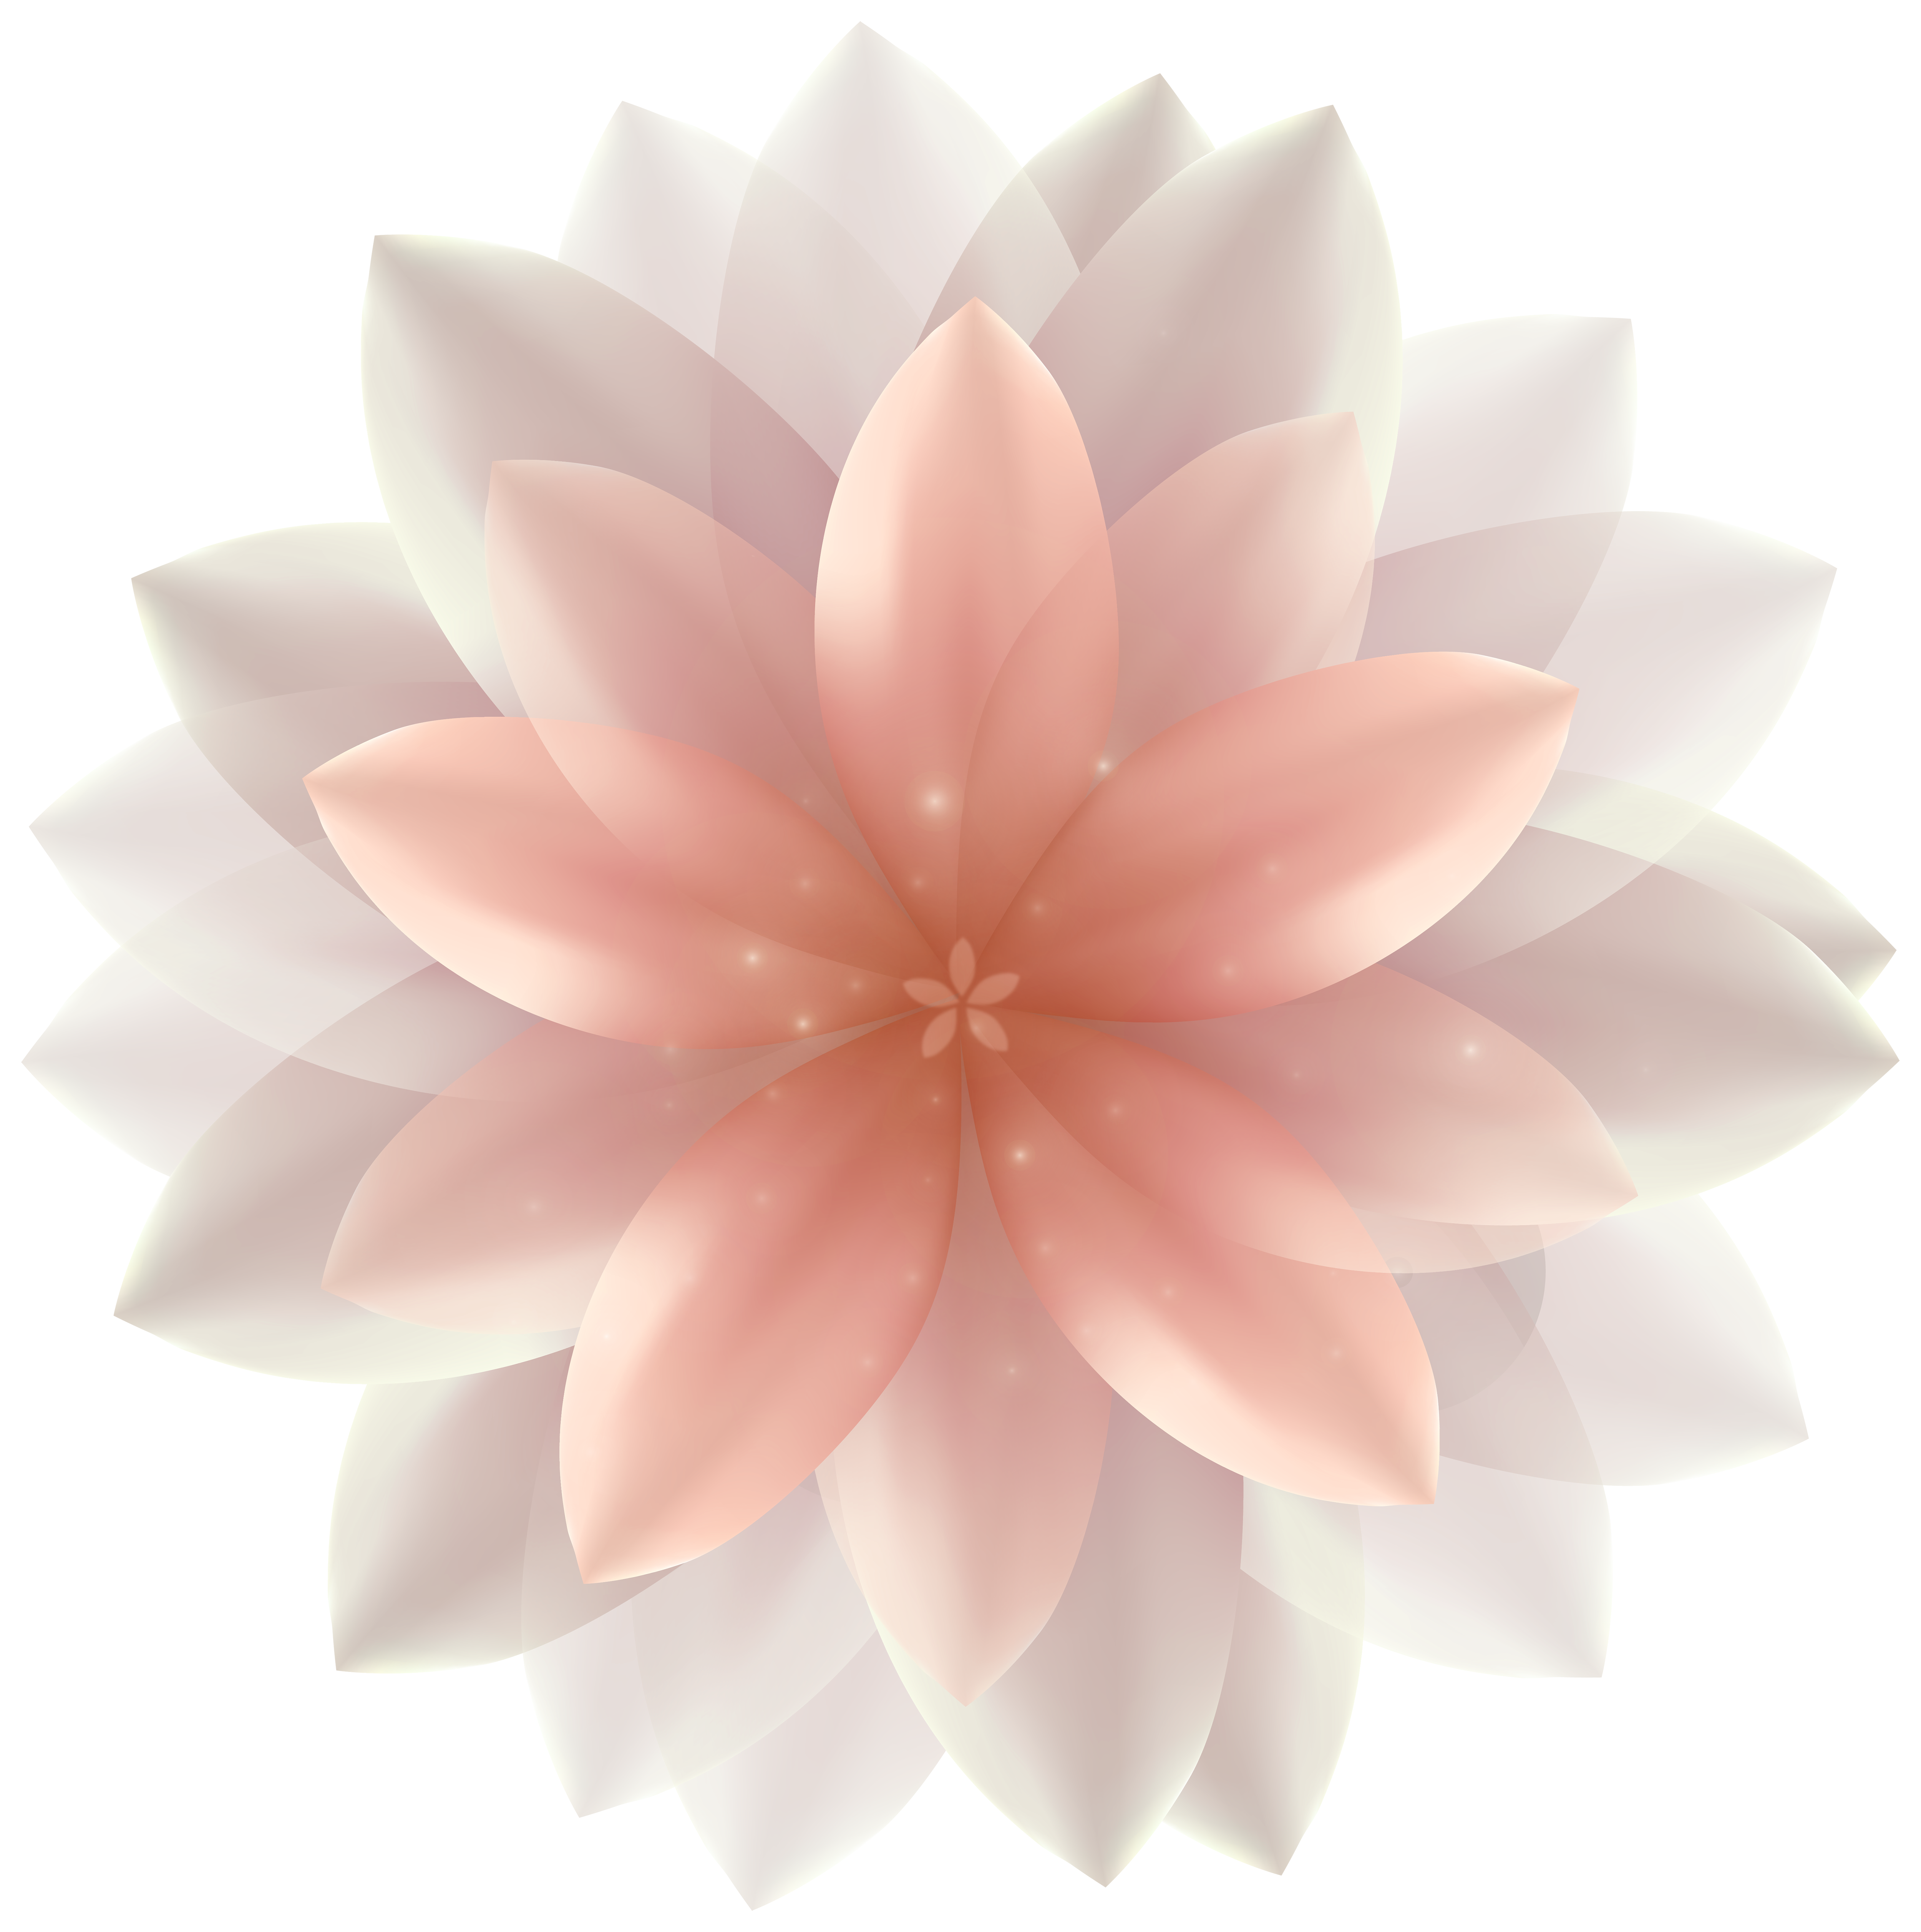 https://gallery.yopriceville.com/var/albums/Free-Clipart-Pictures/Flowers-PNG/Beautiful_Transparent_Flower_PNG_Clipart_Image.png?m=1444100101